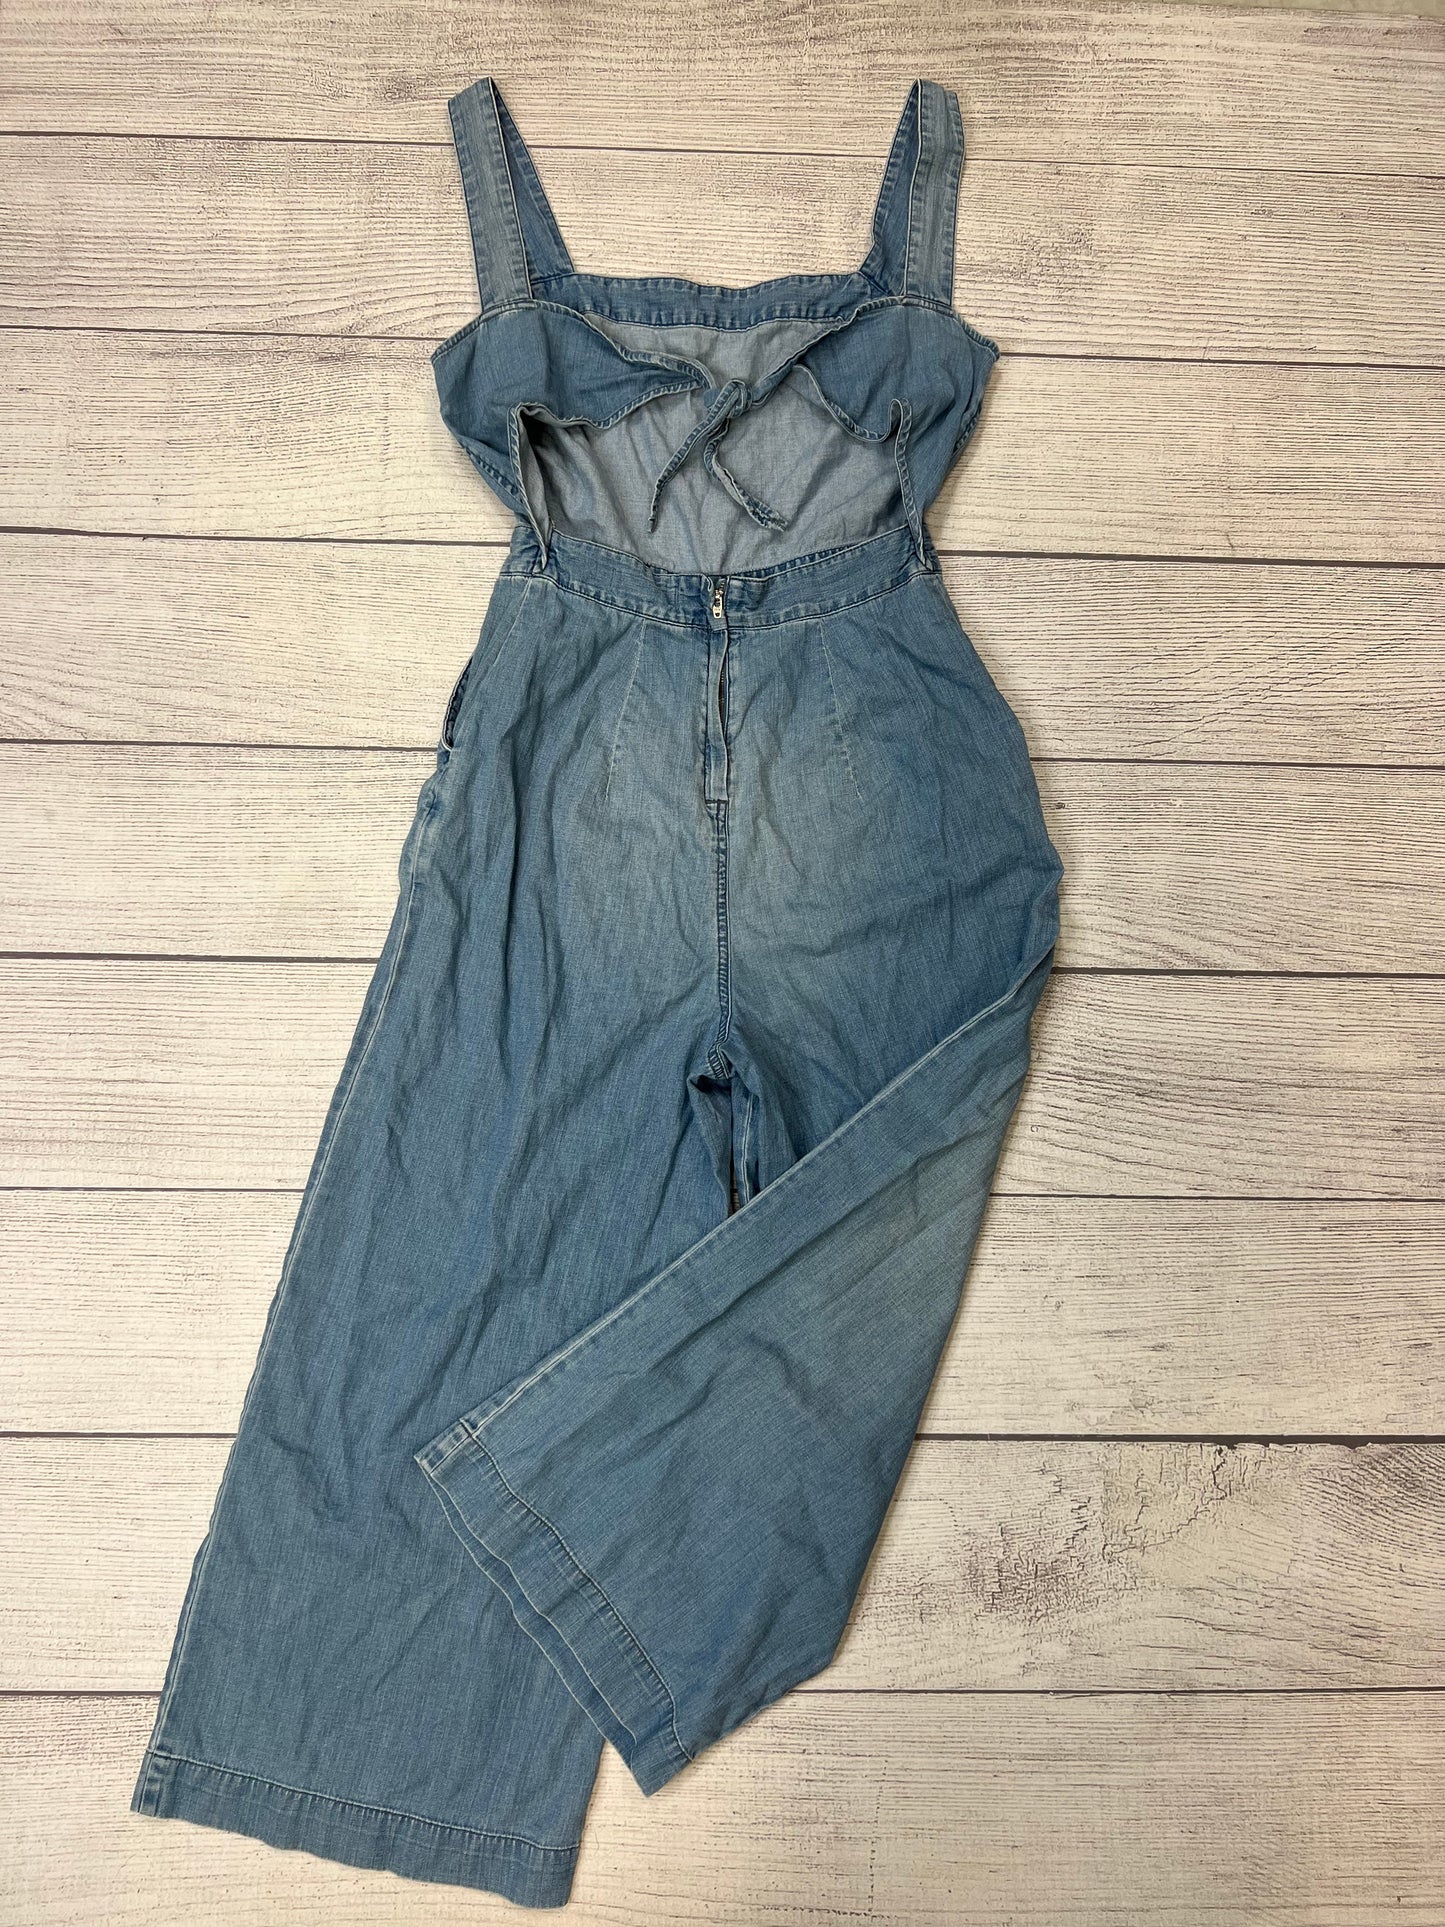 Blue Jumper / Overalls Madewell, Size 6